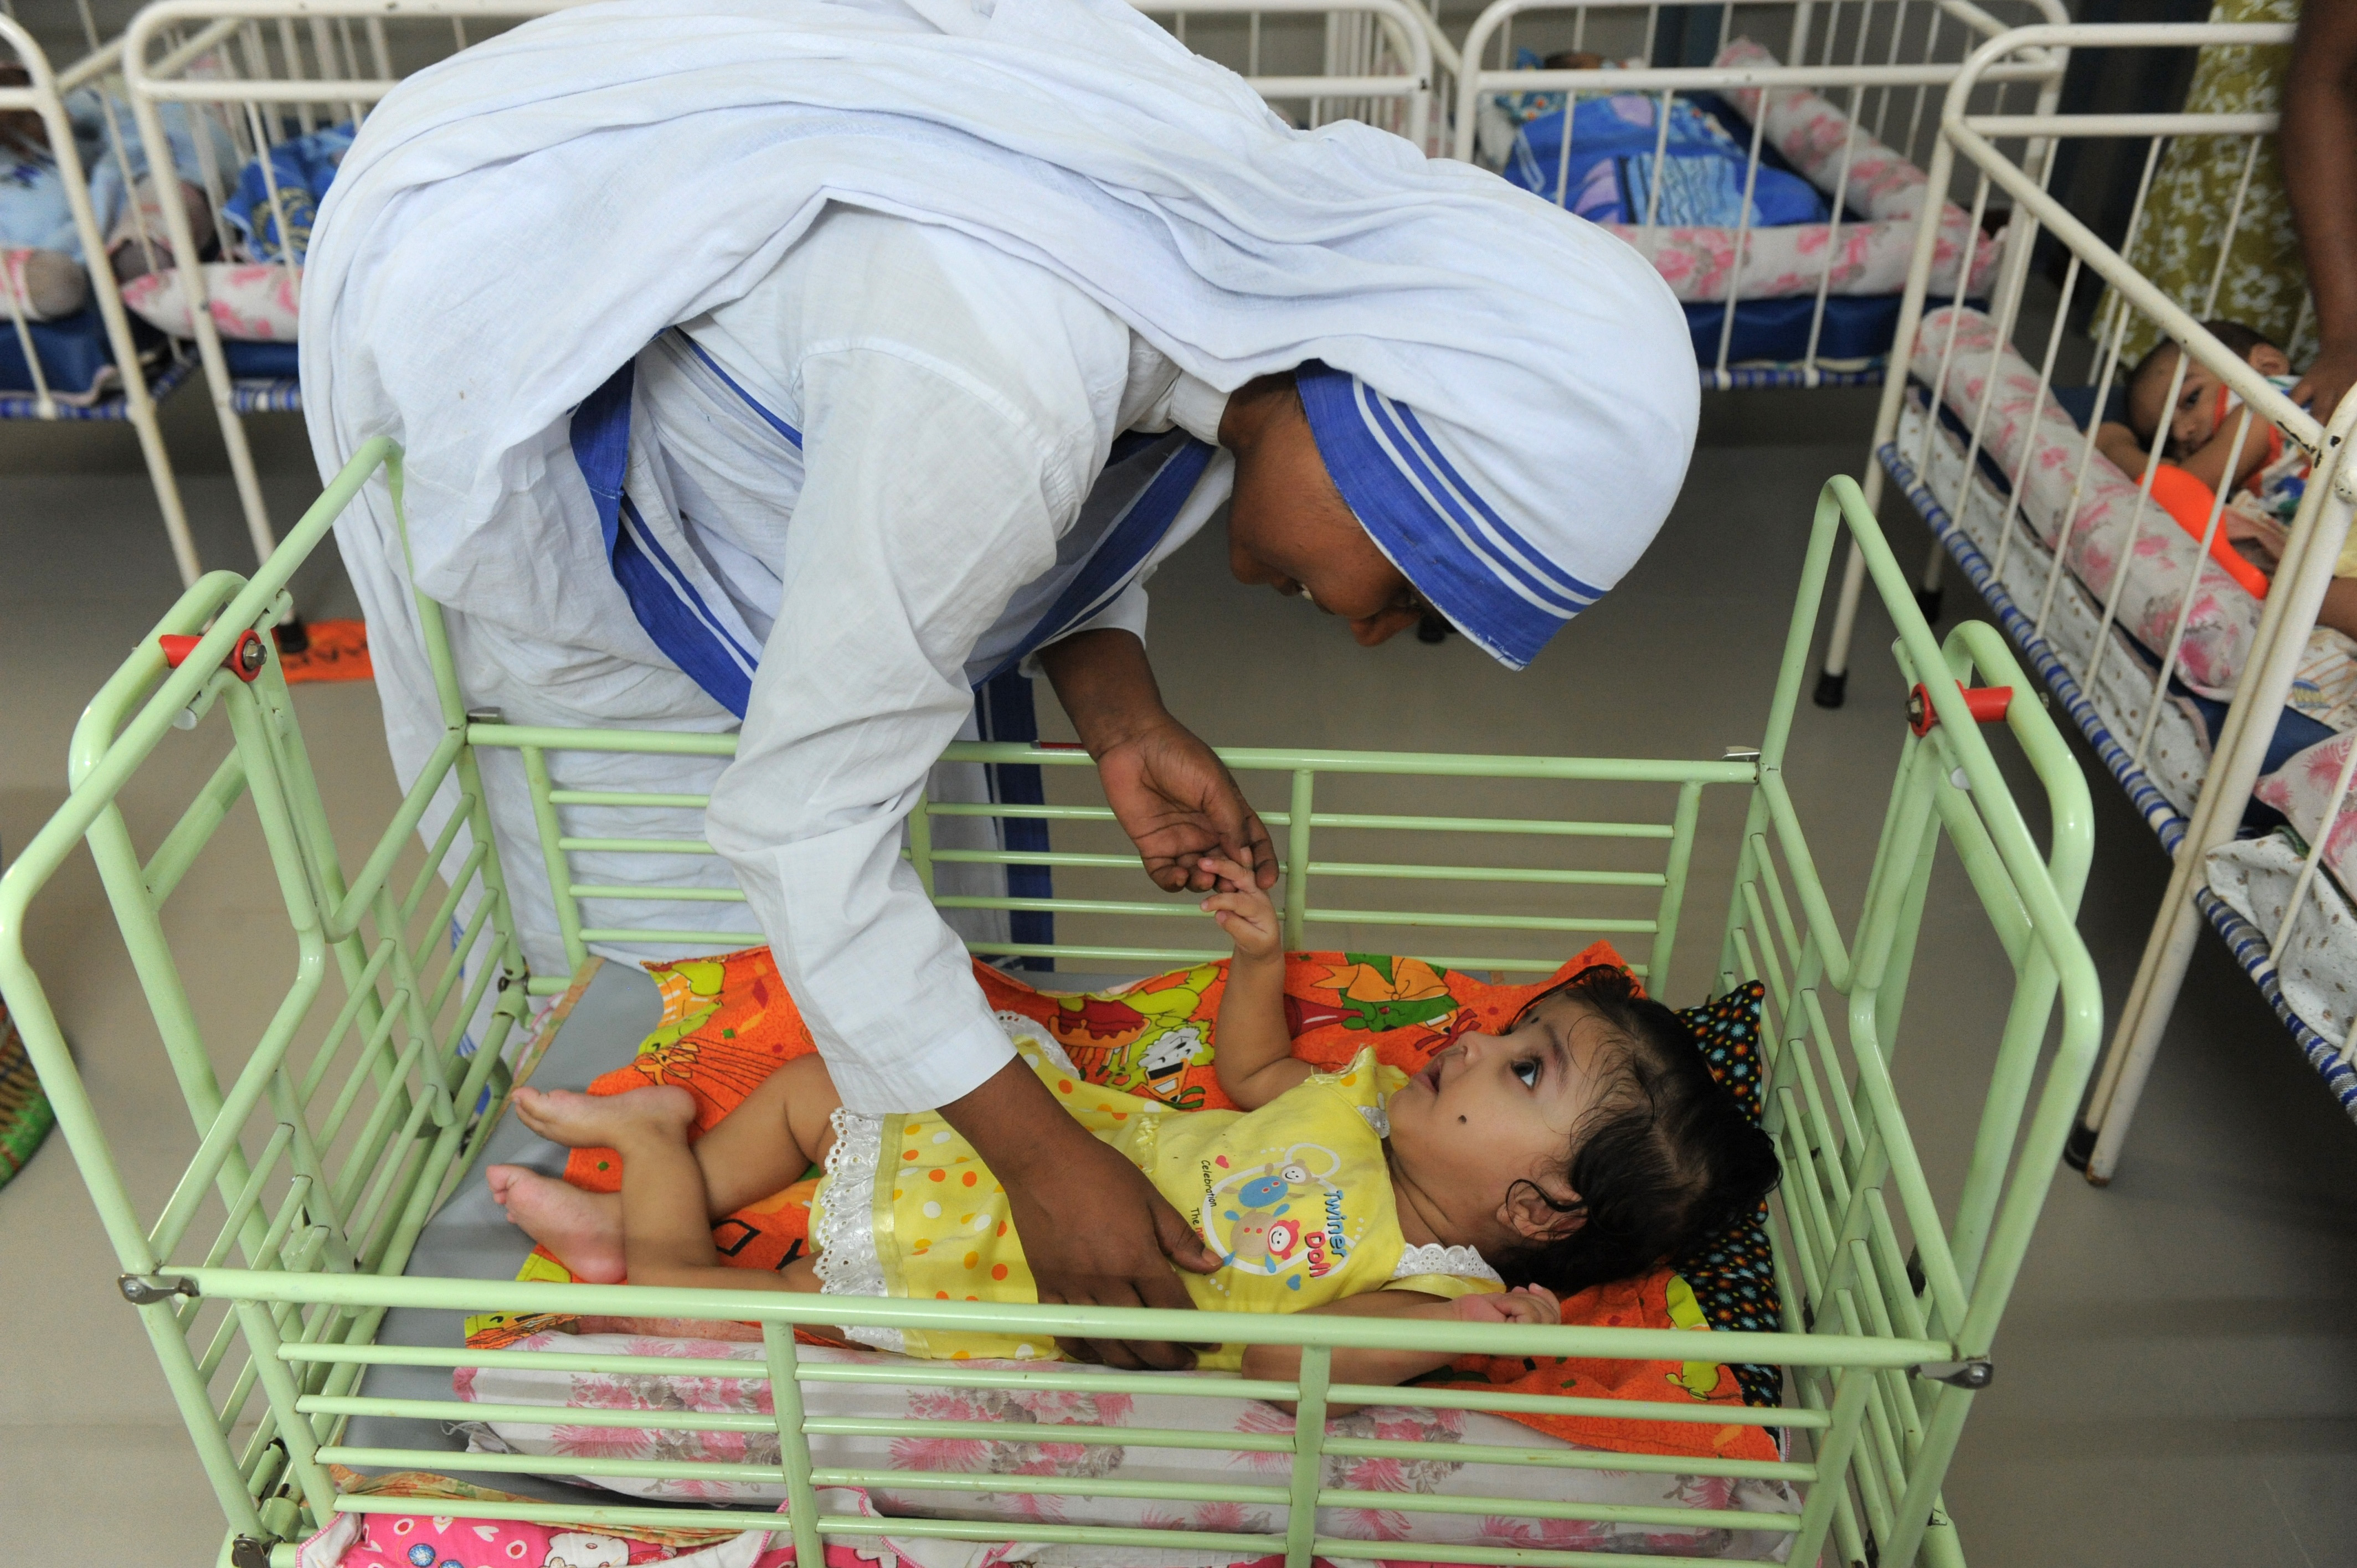 A Christian nun plays with an orphan at Shishu Bhavan, orphanage for discarded babies run by The Missionaries of Charity in Ahmedabad, India, on Sept. 4, 2013. (Sam Panthaky—AFP/Getty Images)